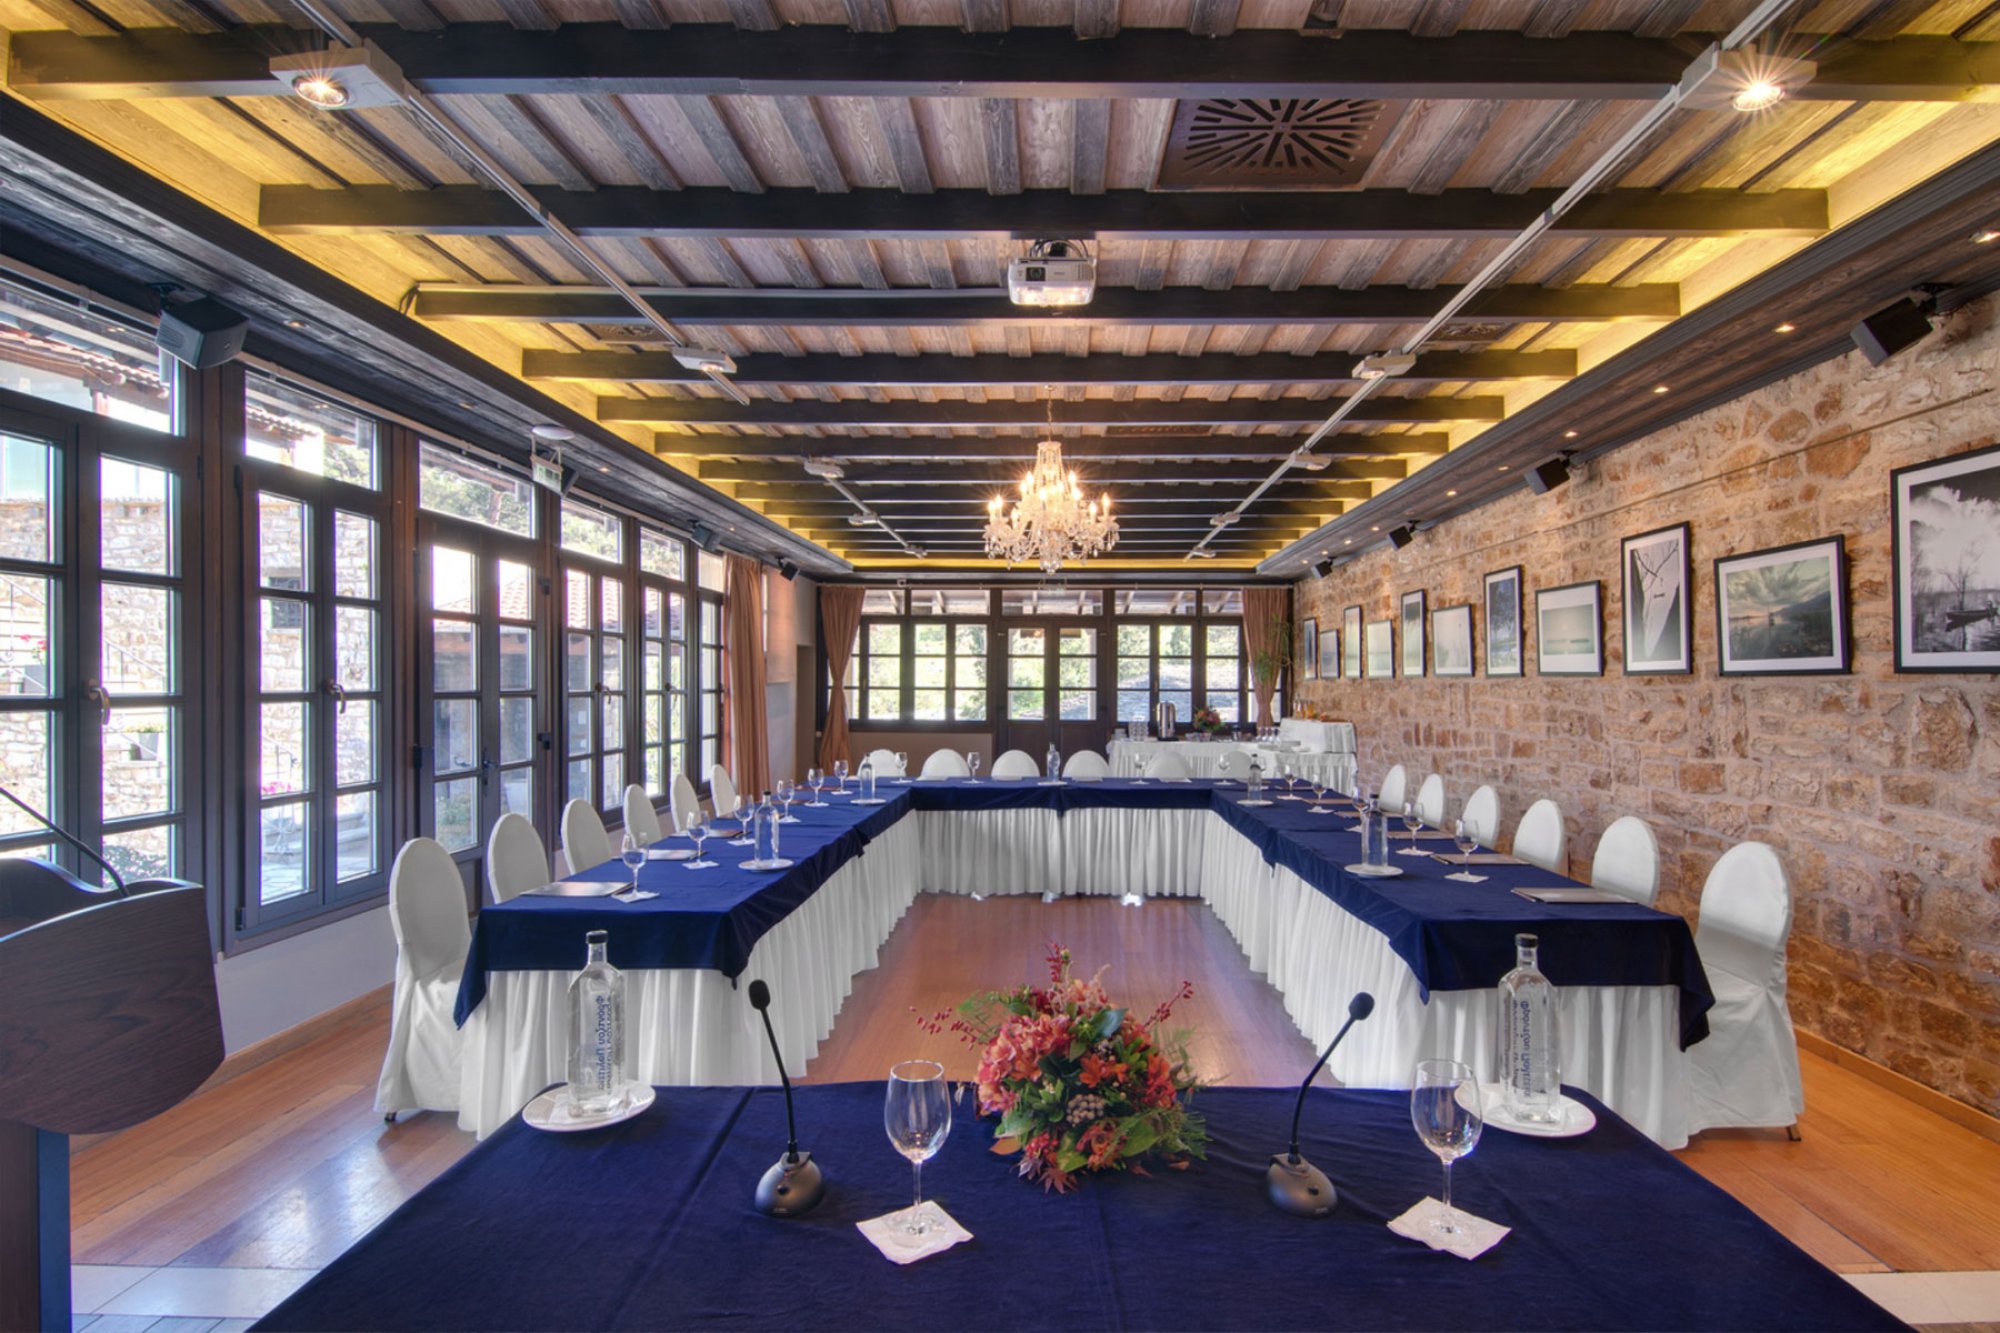 EVENTS AND CONFERENCE ROOMS